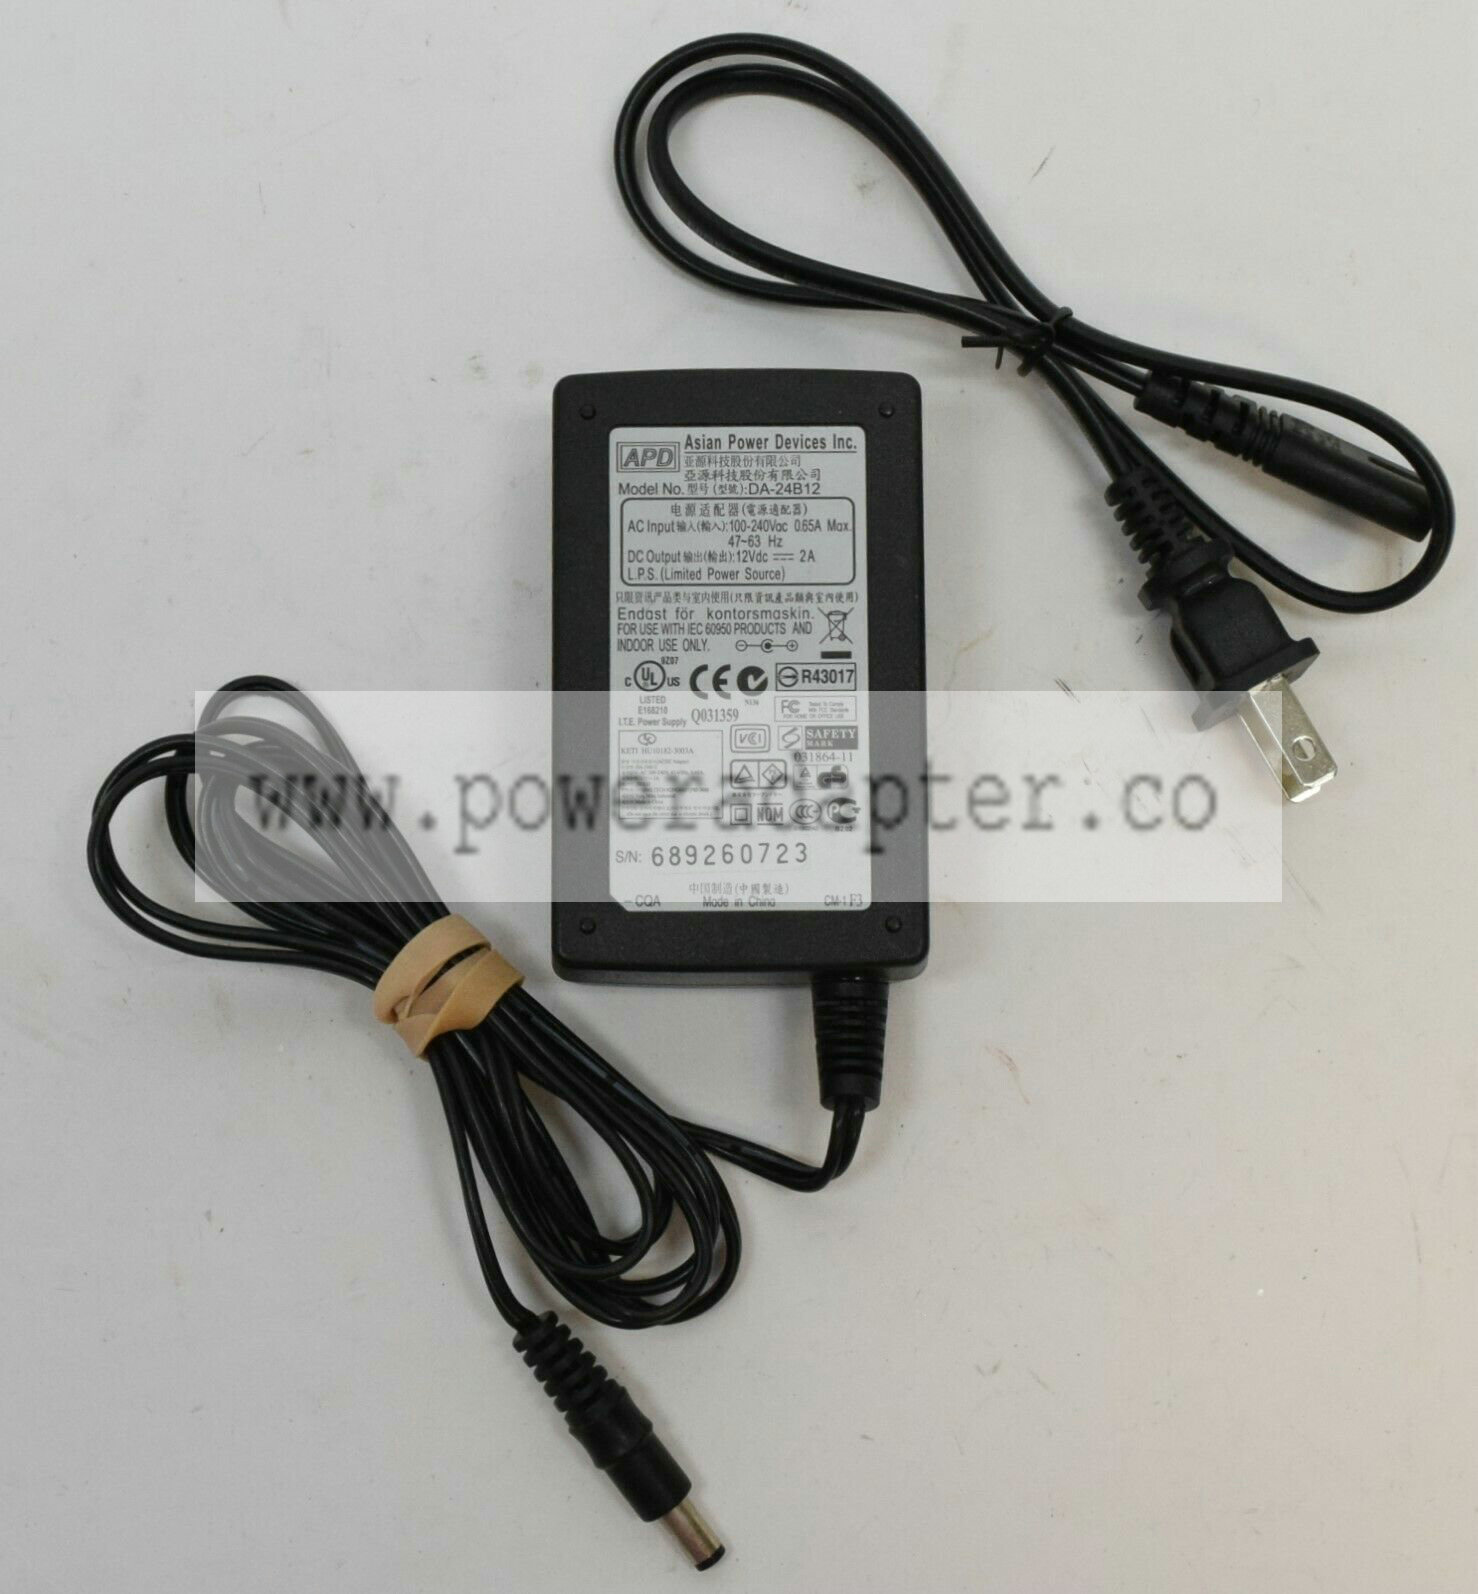 APD Asian Power Devices AC Adapter DA-24B12 Output 12Vdc 2A Non-Domestic Product: No Type: AC/Standard Modified Item